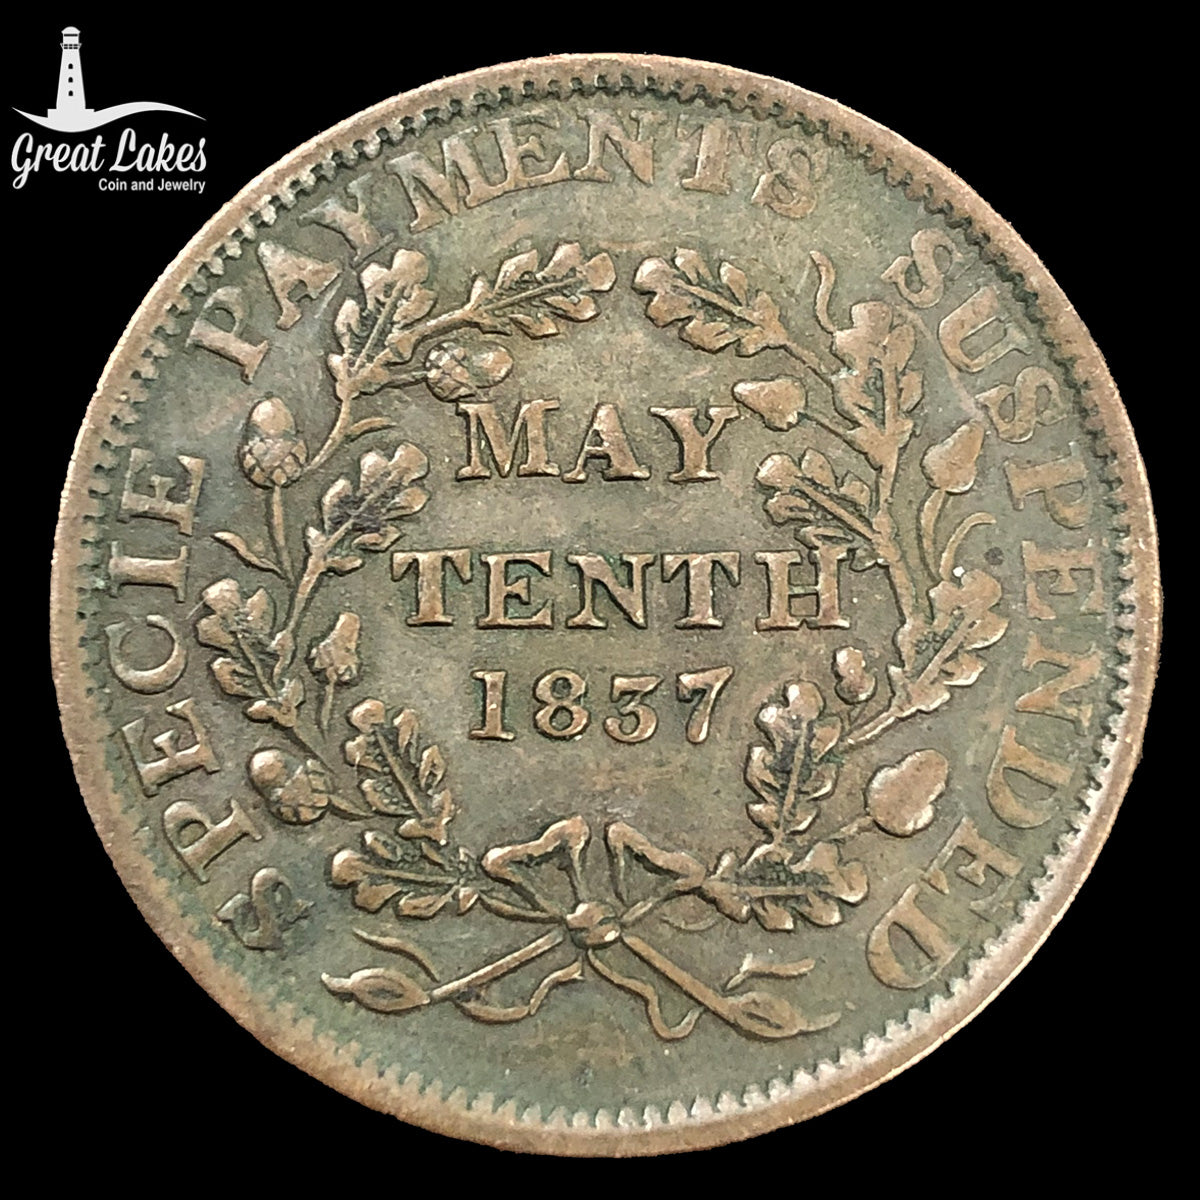 1837 Specie Payments Suspended May 10th Shin Plasters Hard Times Token (XF)